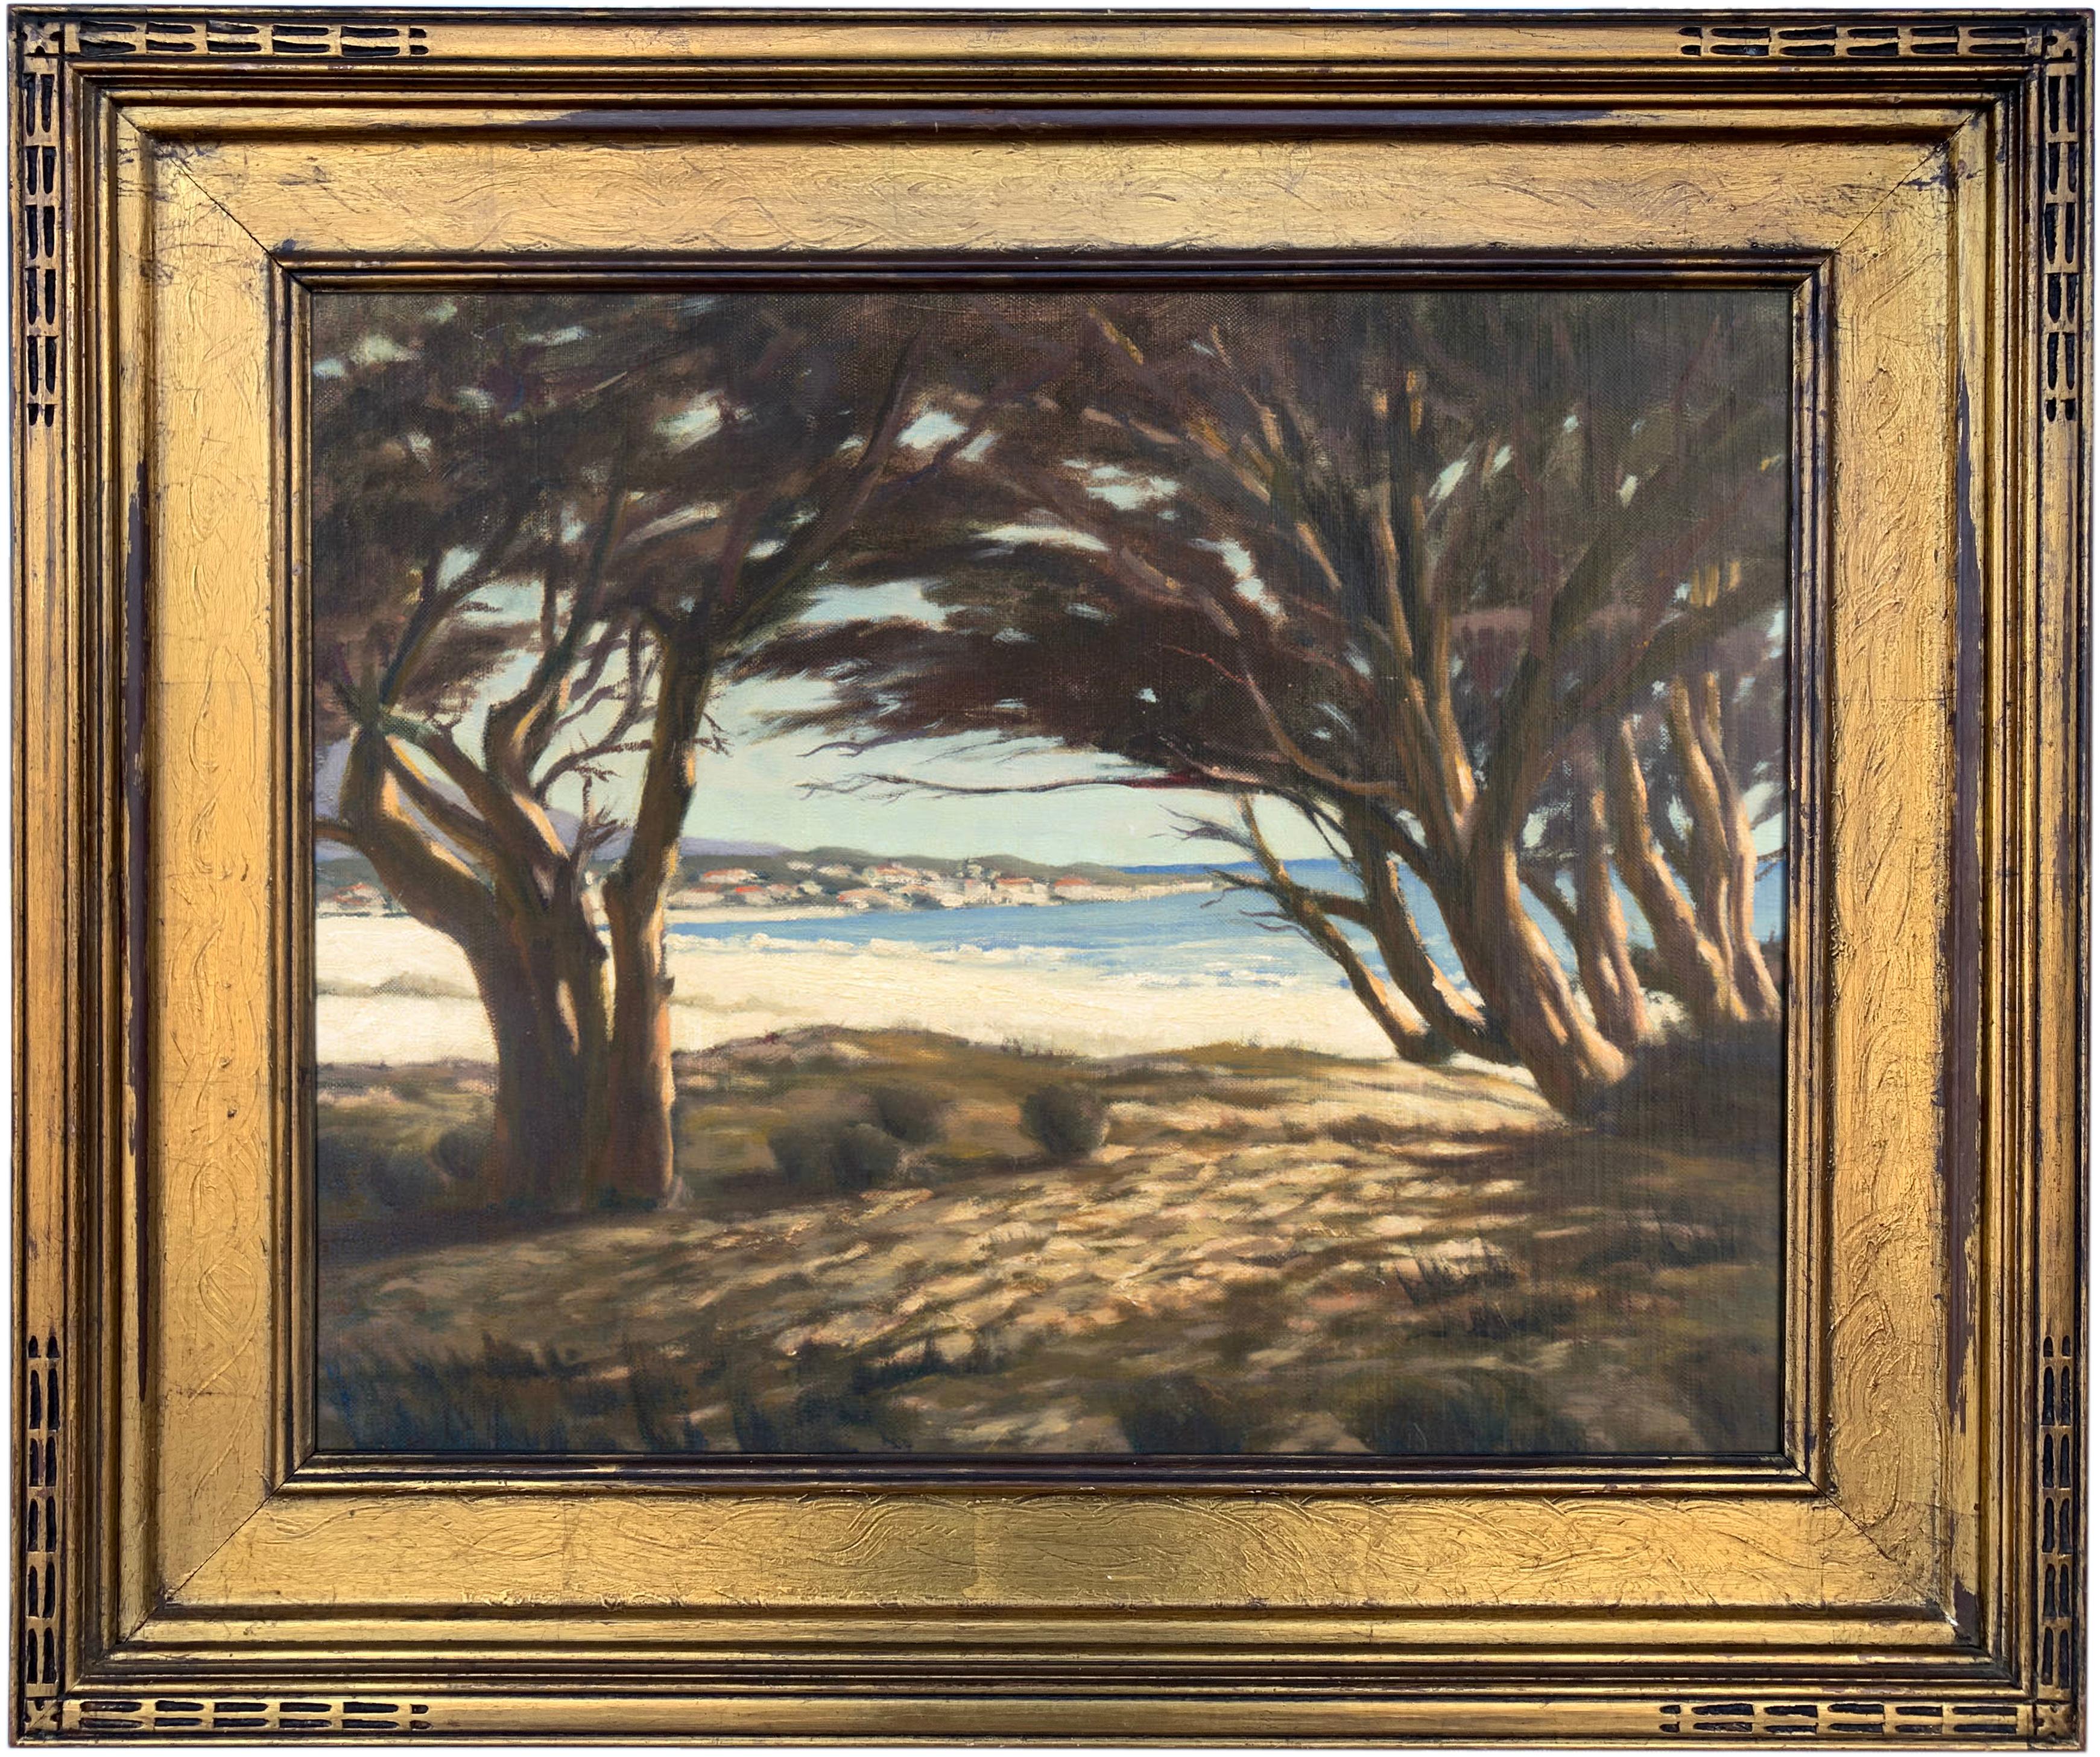 S. P. Danno Landscape Painting - 'View of the Pacific at Carmel', American Impressionist, Plein Air, California